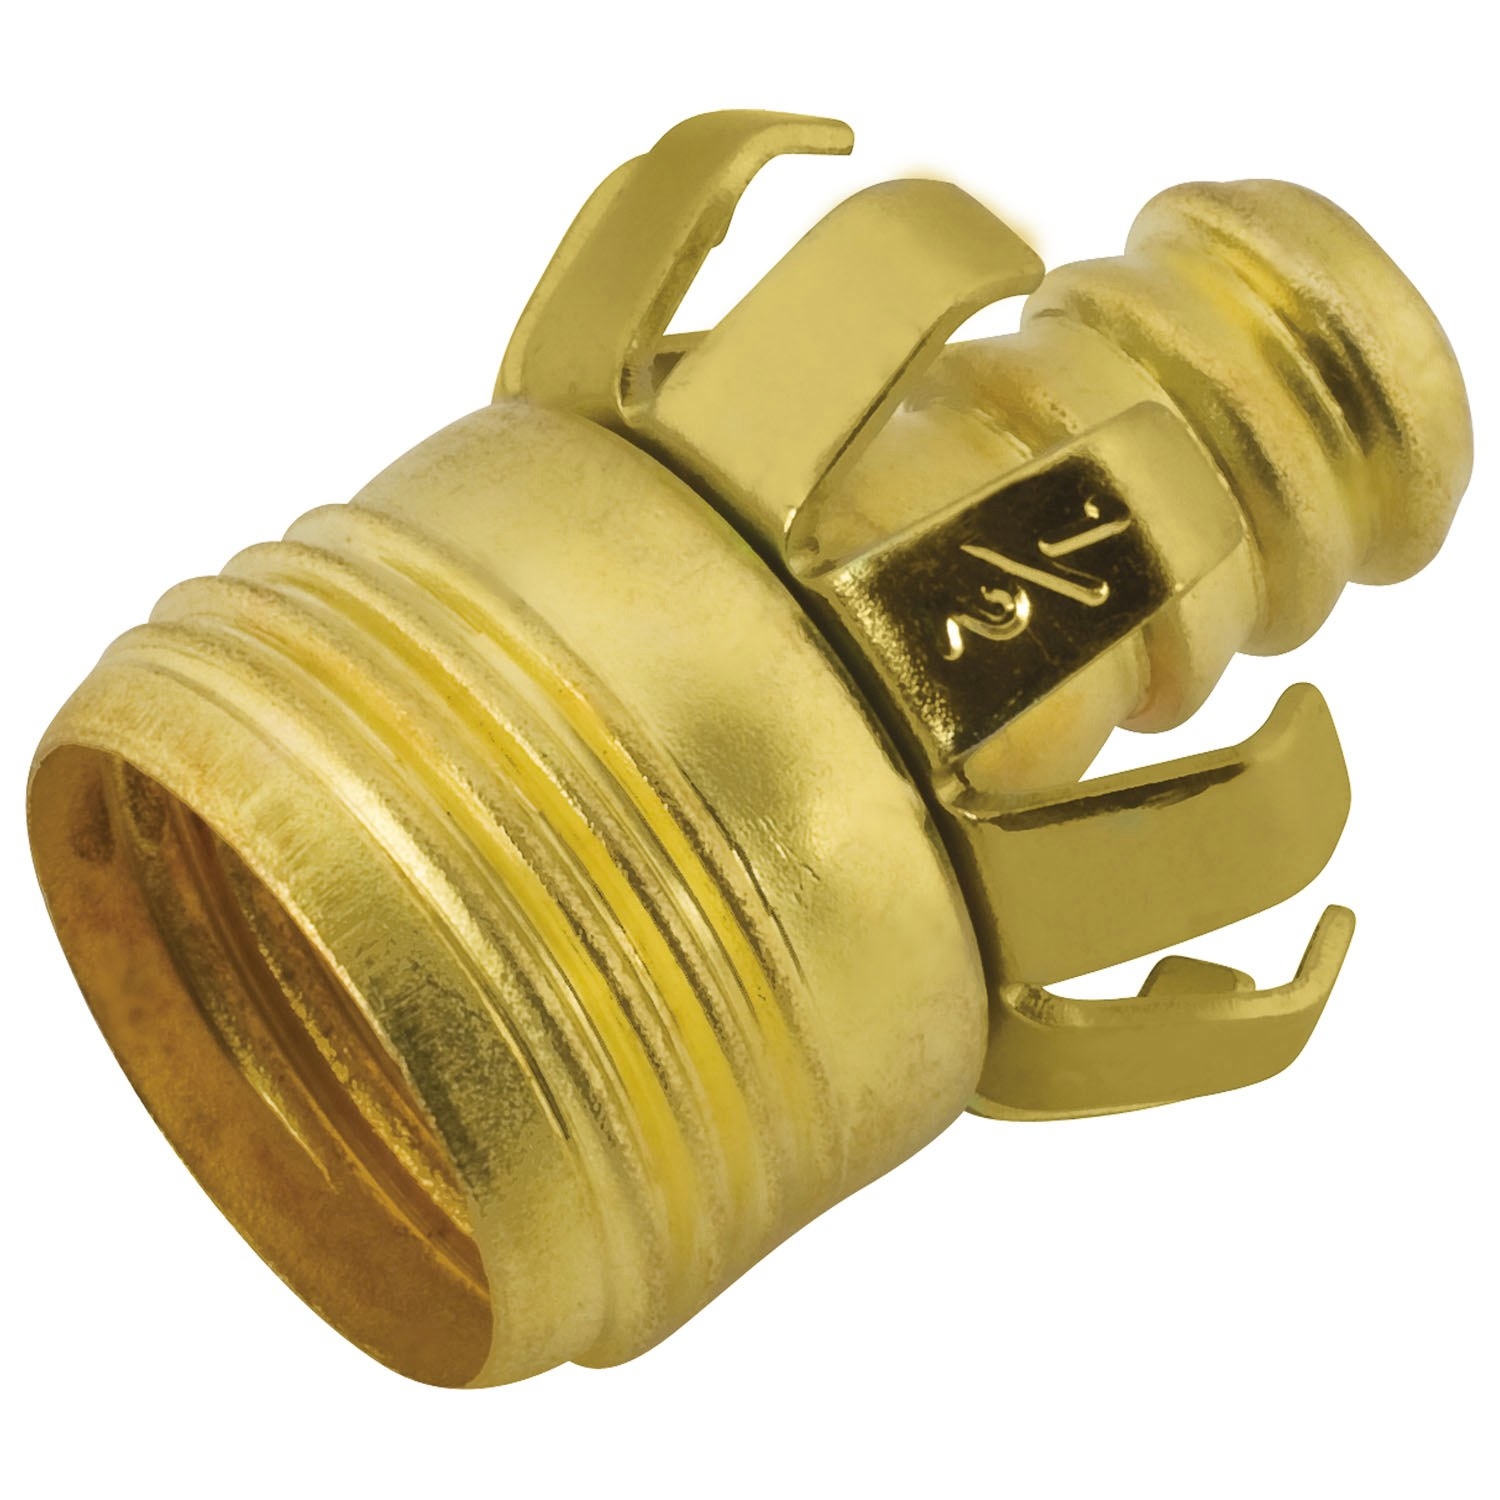 Ace 1/2 in. Metal Male Clinch Hose Mender Clamp